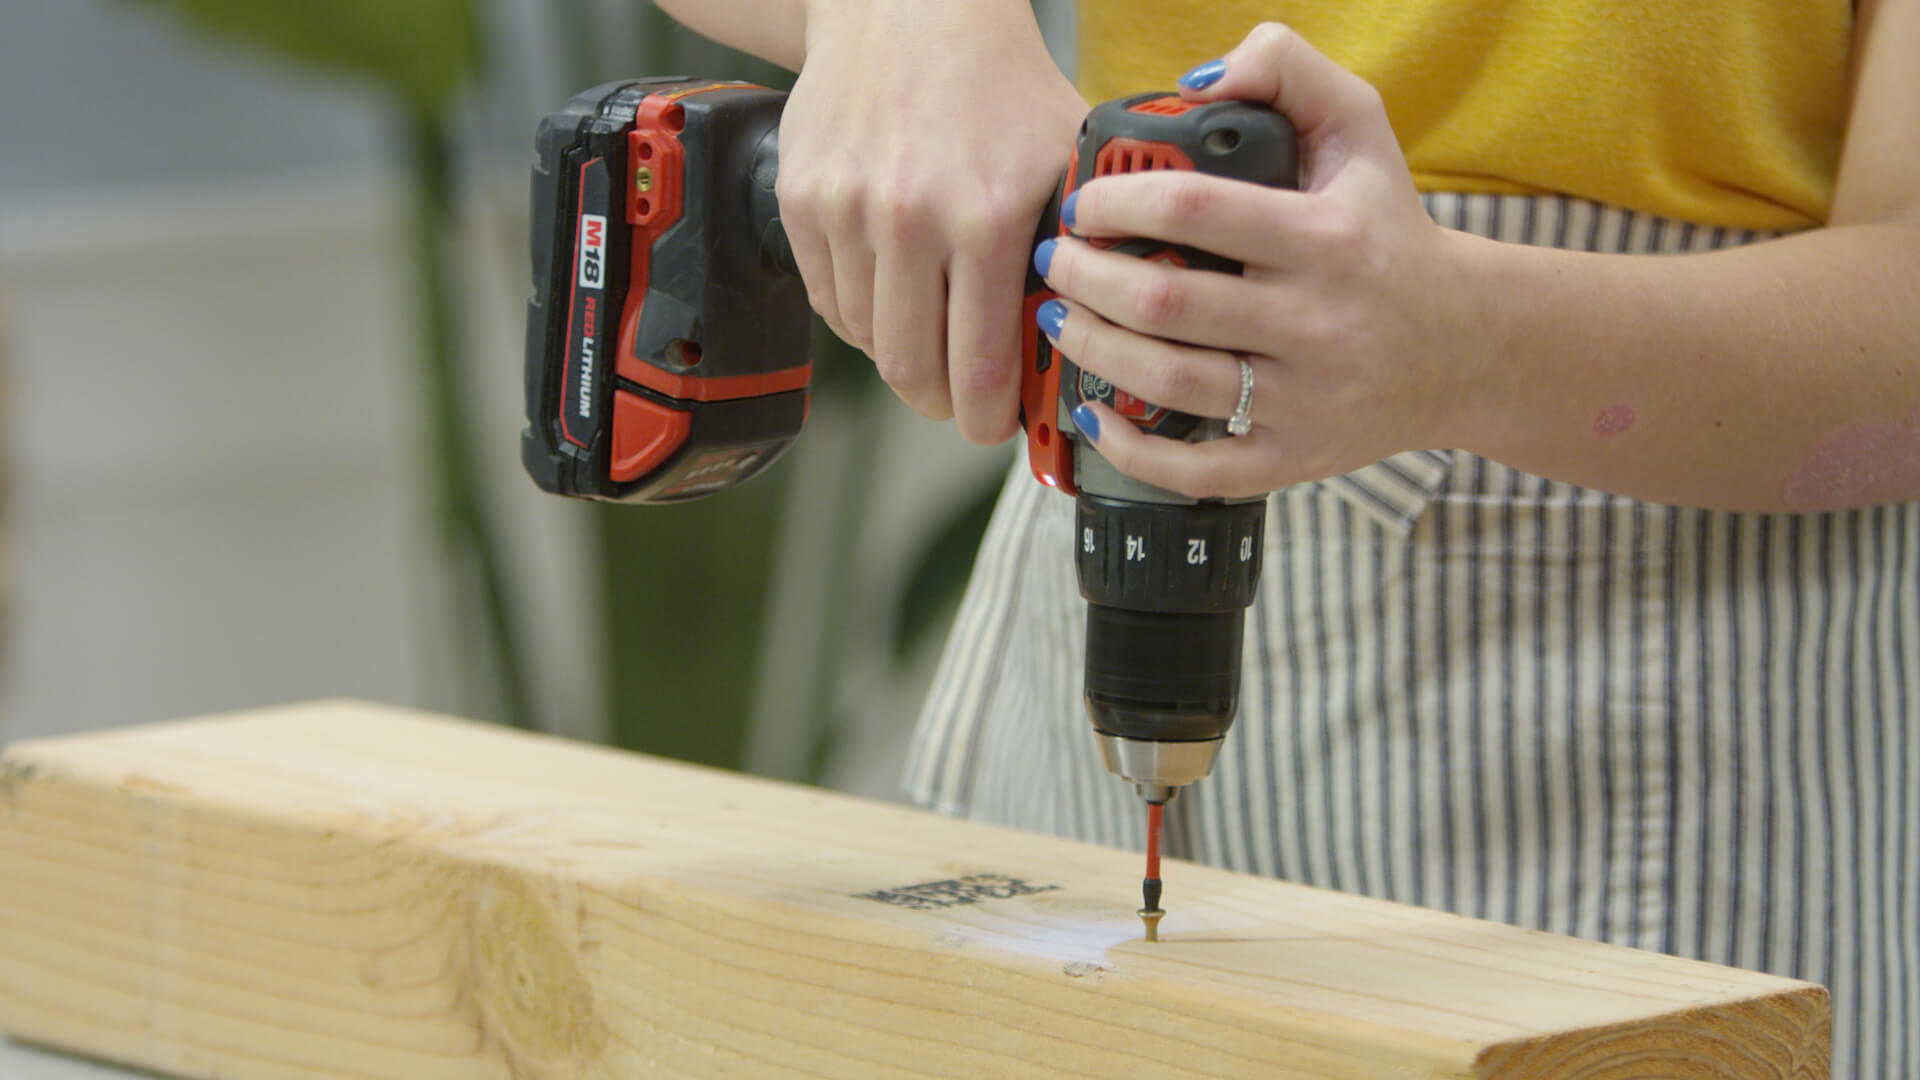 How To Maintain Hand-Held Electric Power Tools